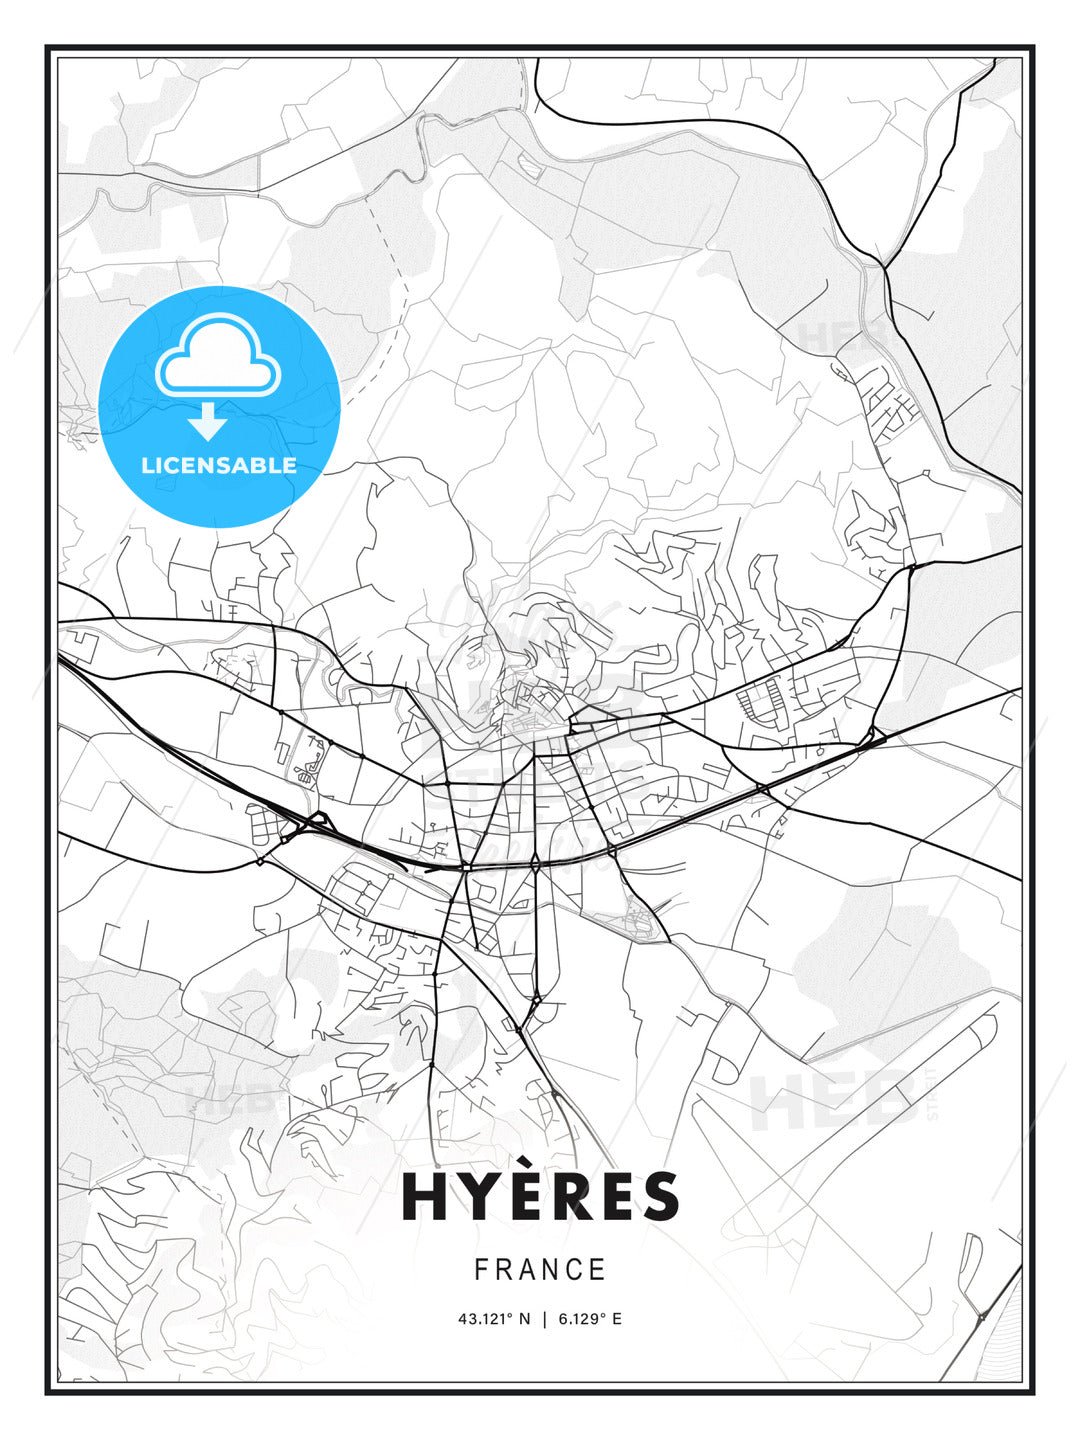 Hyères, France, Modern Print Template in Various Formats - HEBSTREITS Sketches